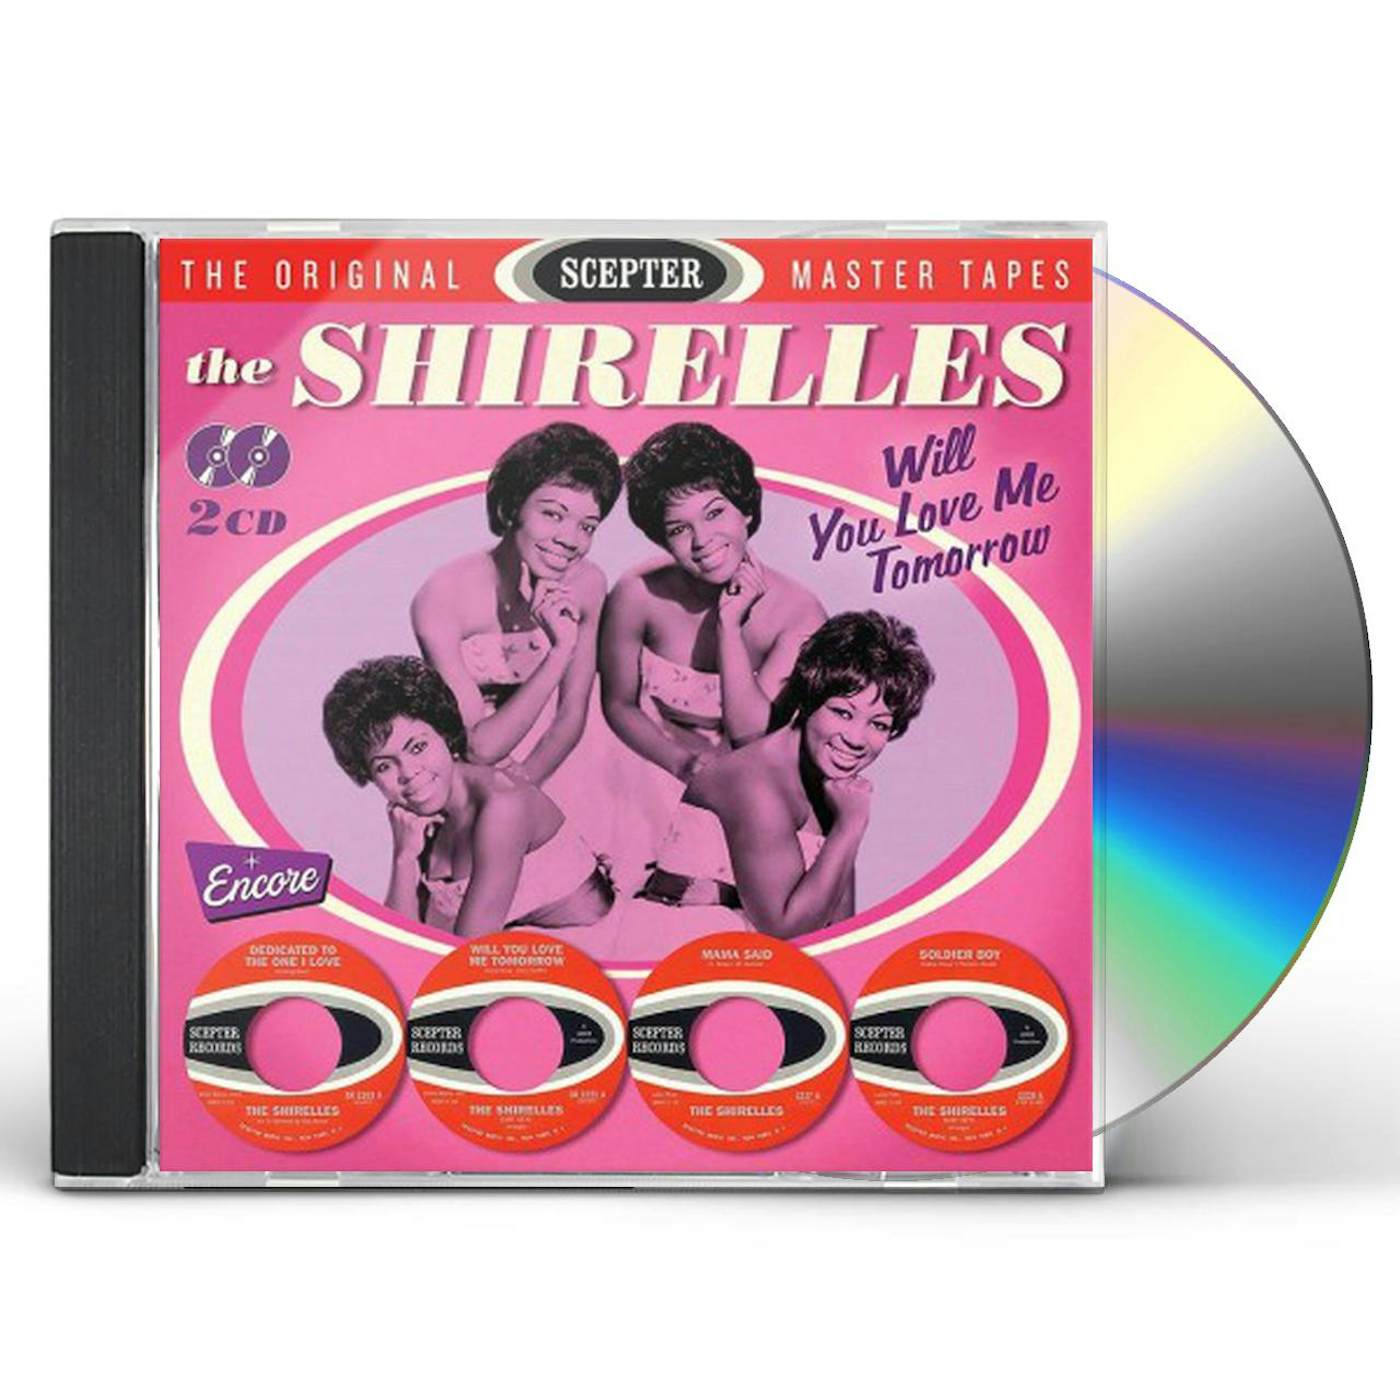 The Shirelles WILL YOU LOVE ME TOMORROW CD